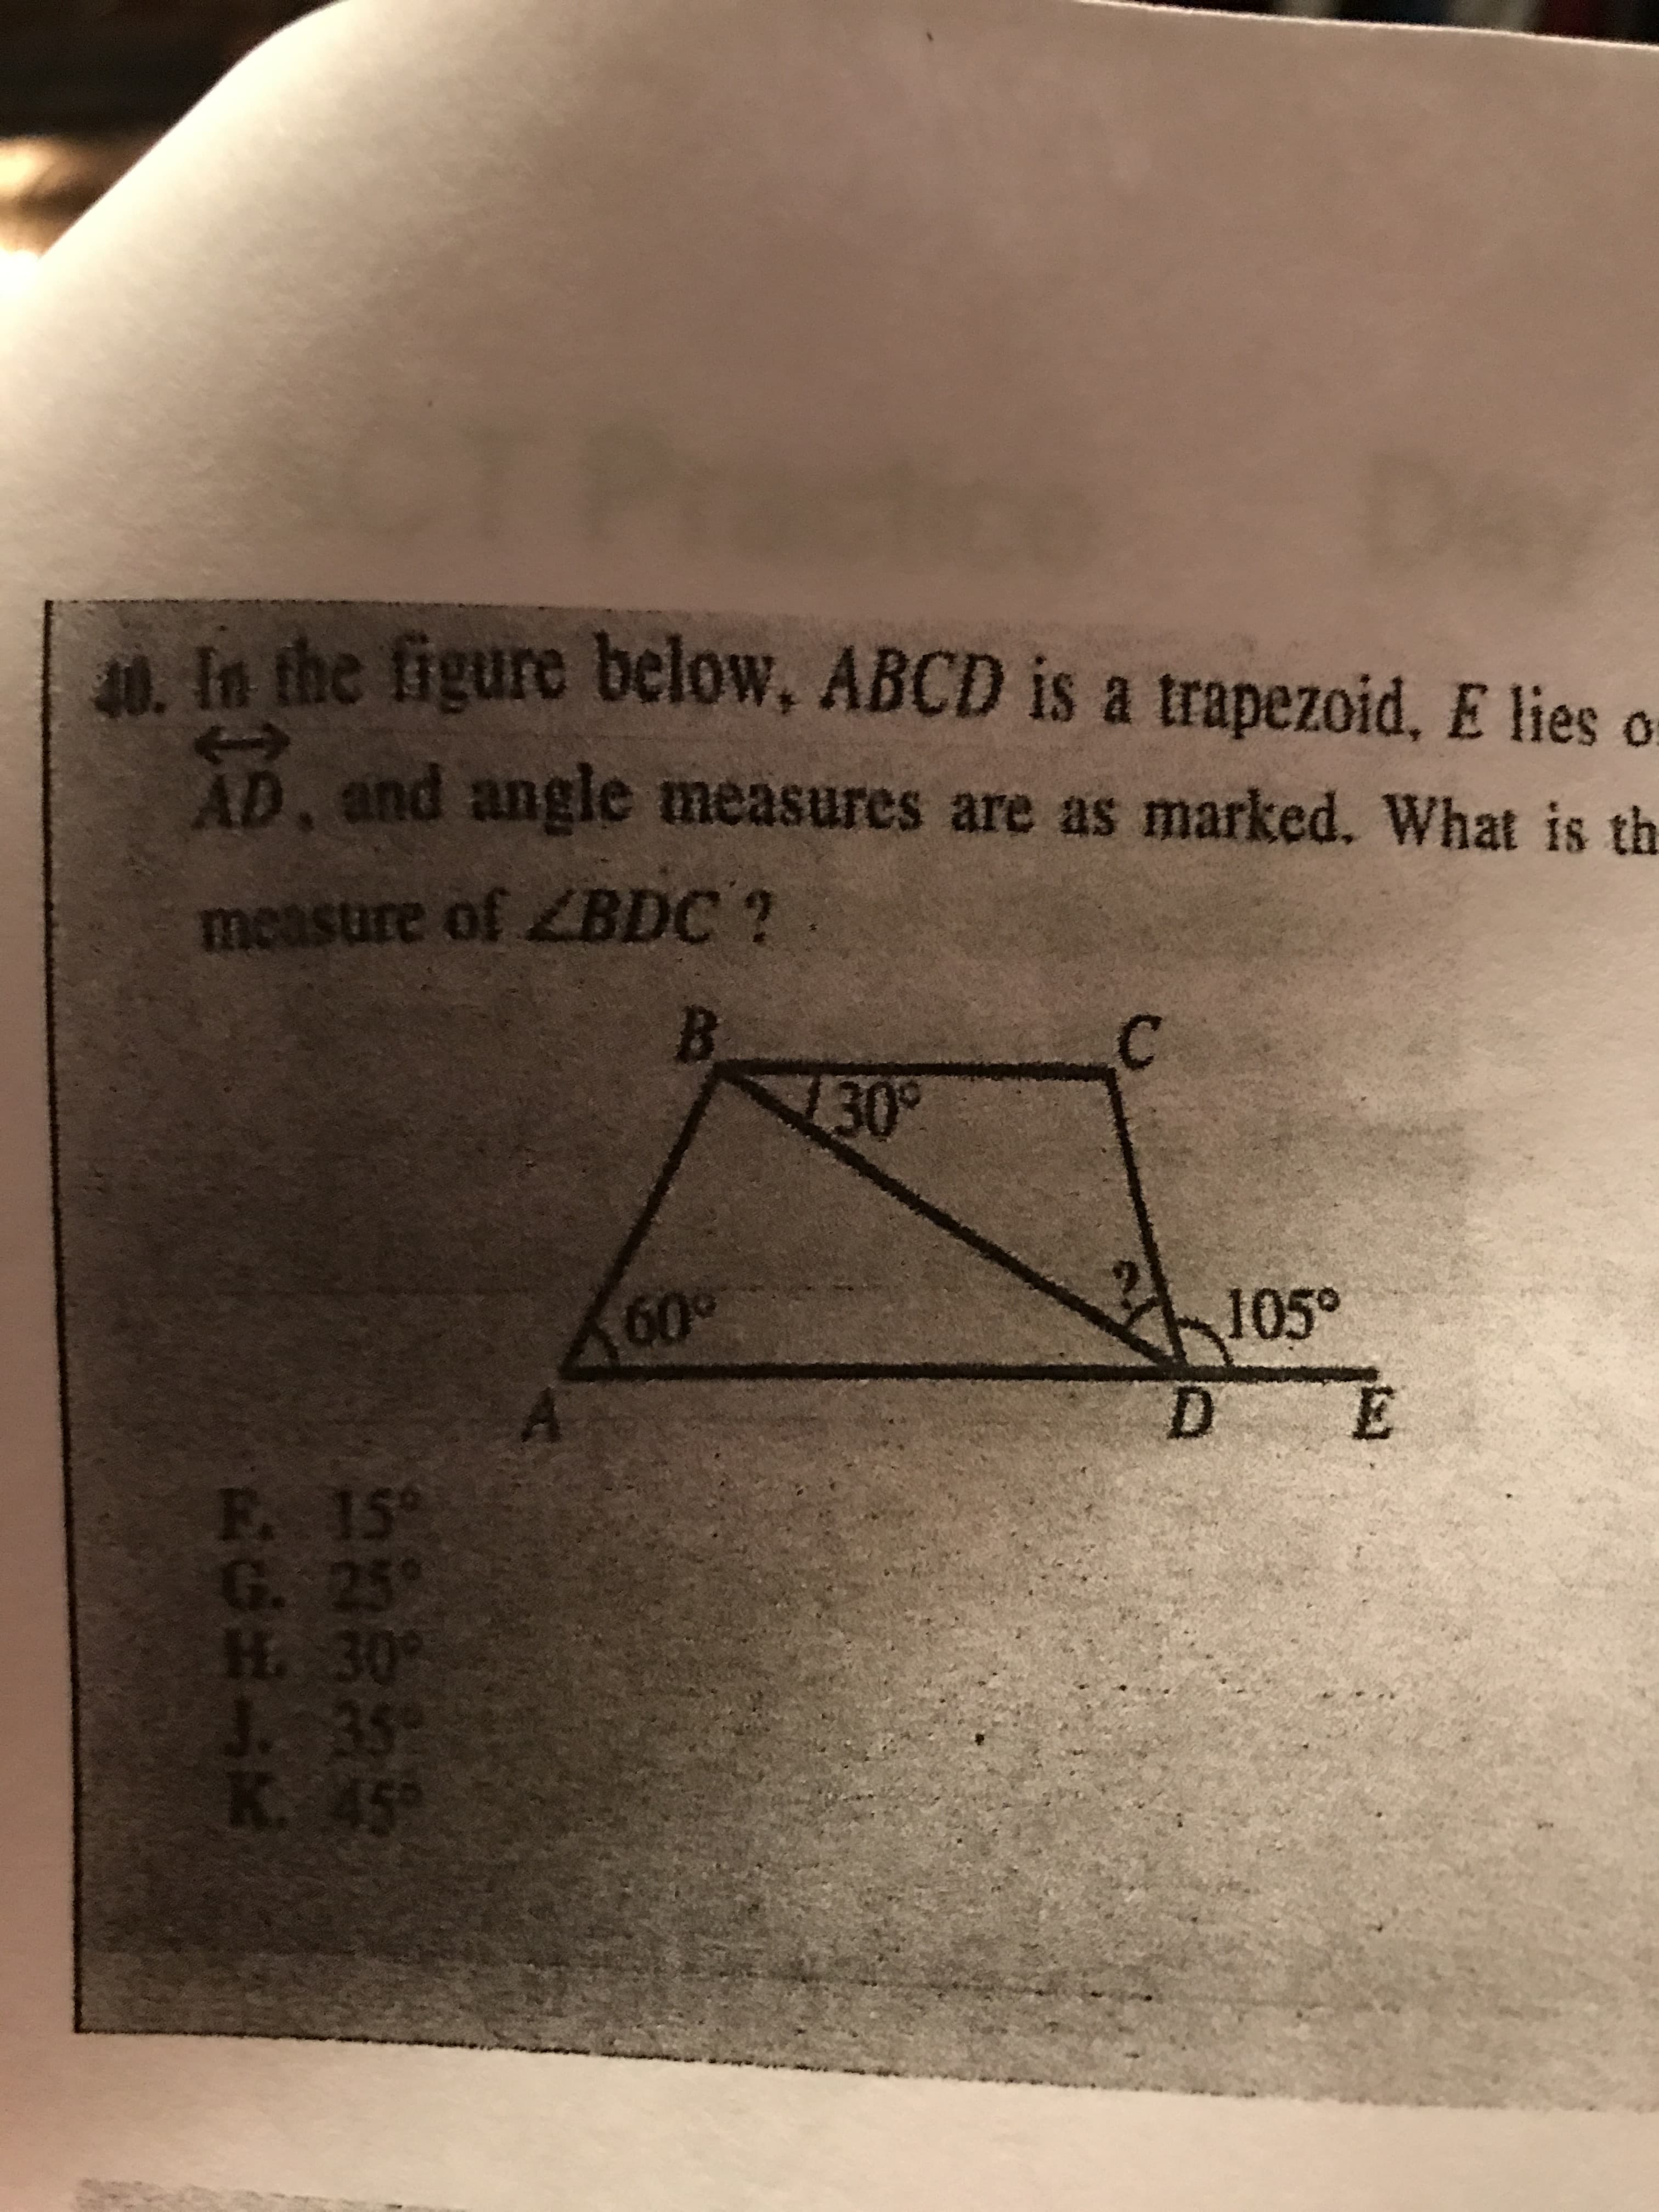 a fn the figure below, ABCD is a trapezoid, E lies o
AD, and angle measures are as marked. What is th
measure of ZBDC?
B.
130°
60°
105°
D
F. 15
G. 25°
H. 30°
J. 35
K. 45°
